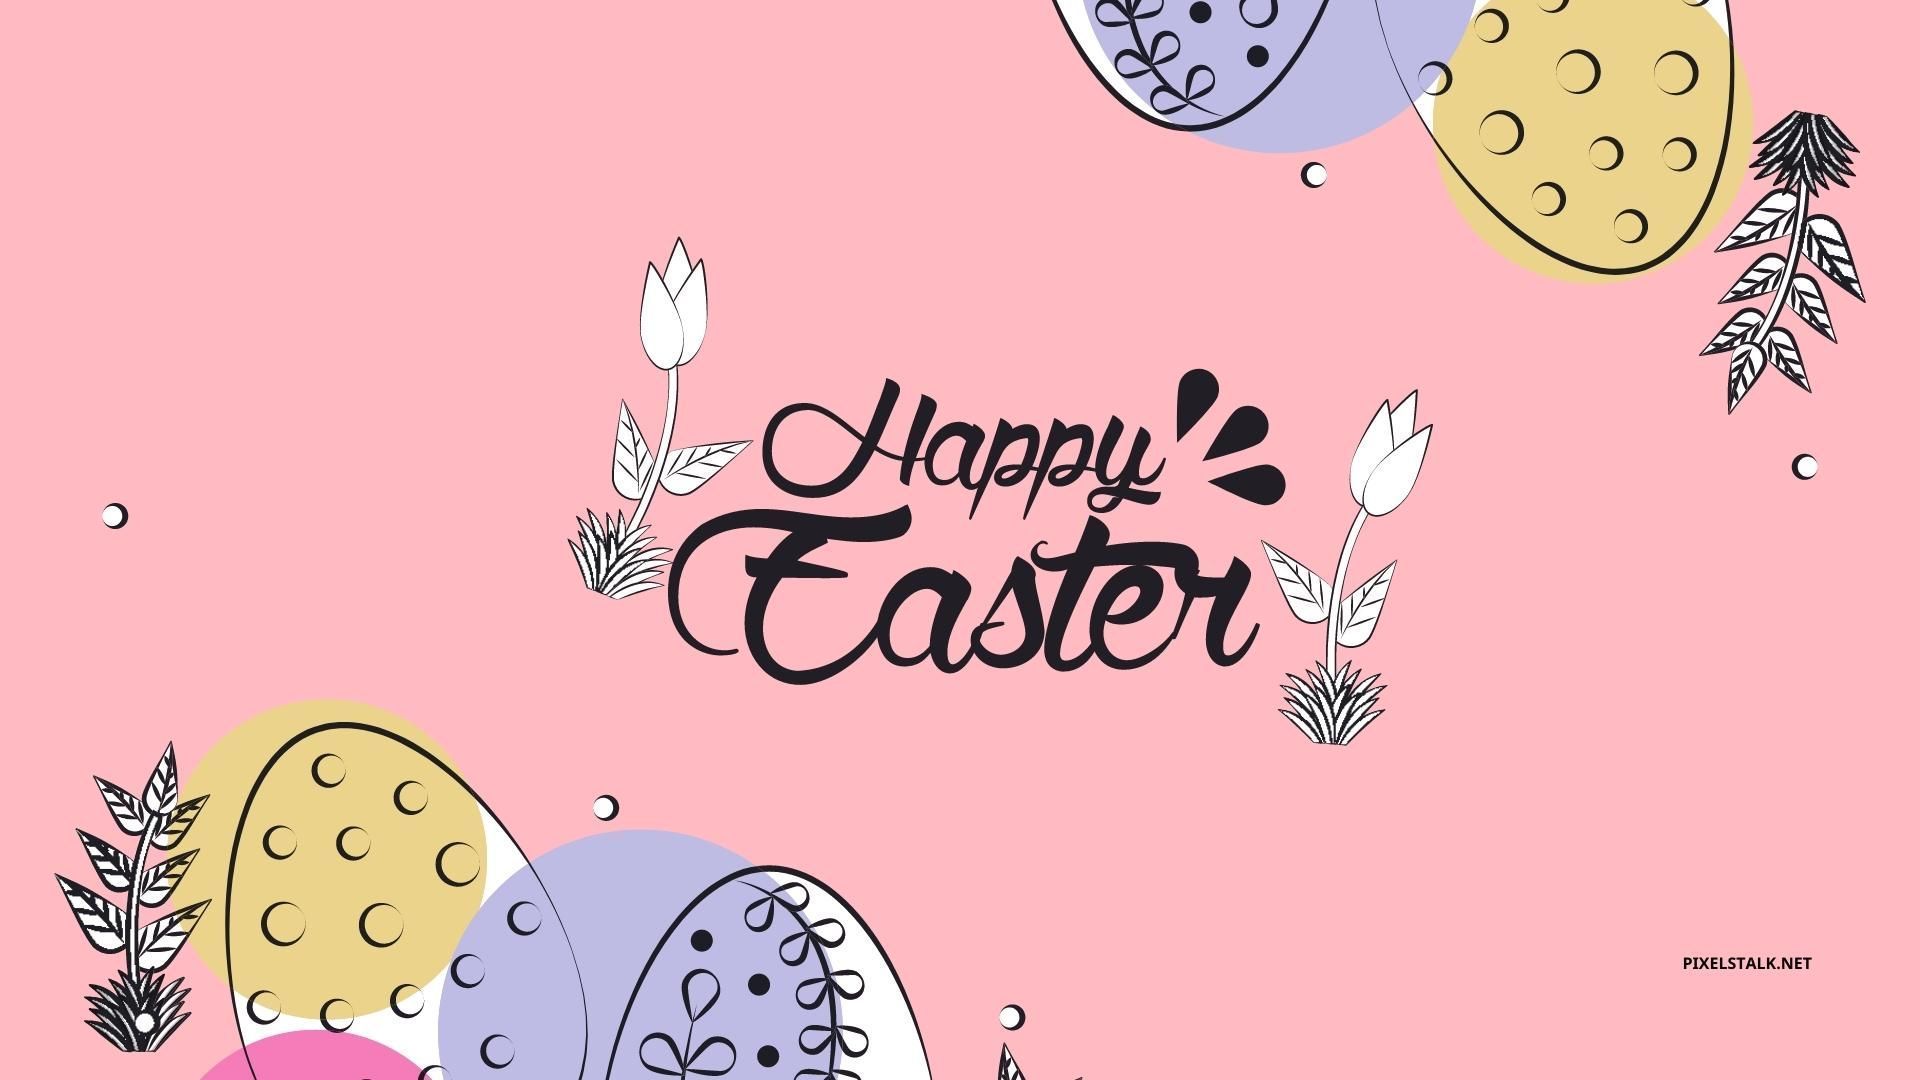 Happy Easter Wallpaper HD Free download